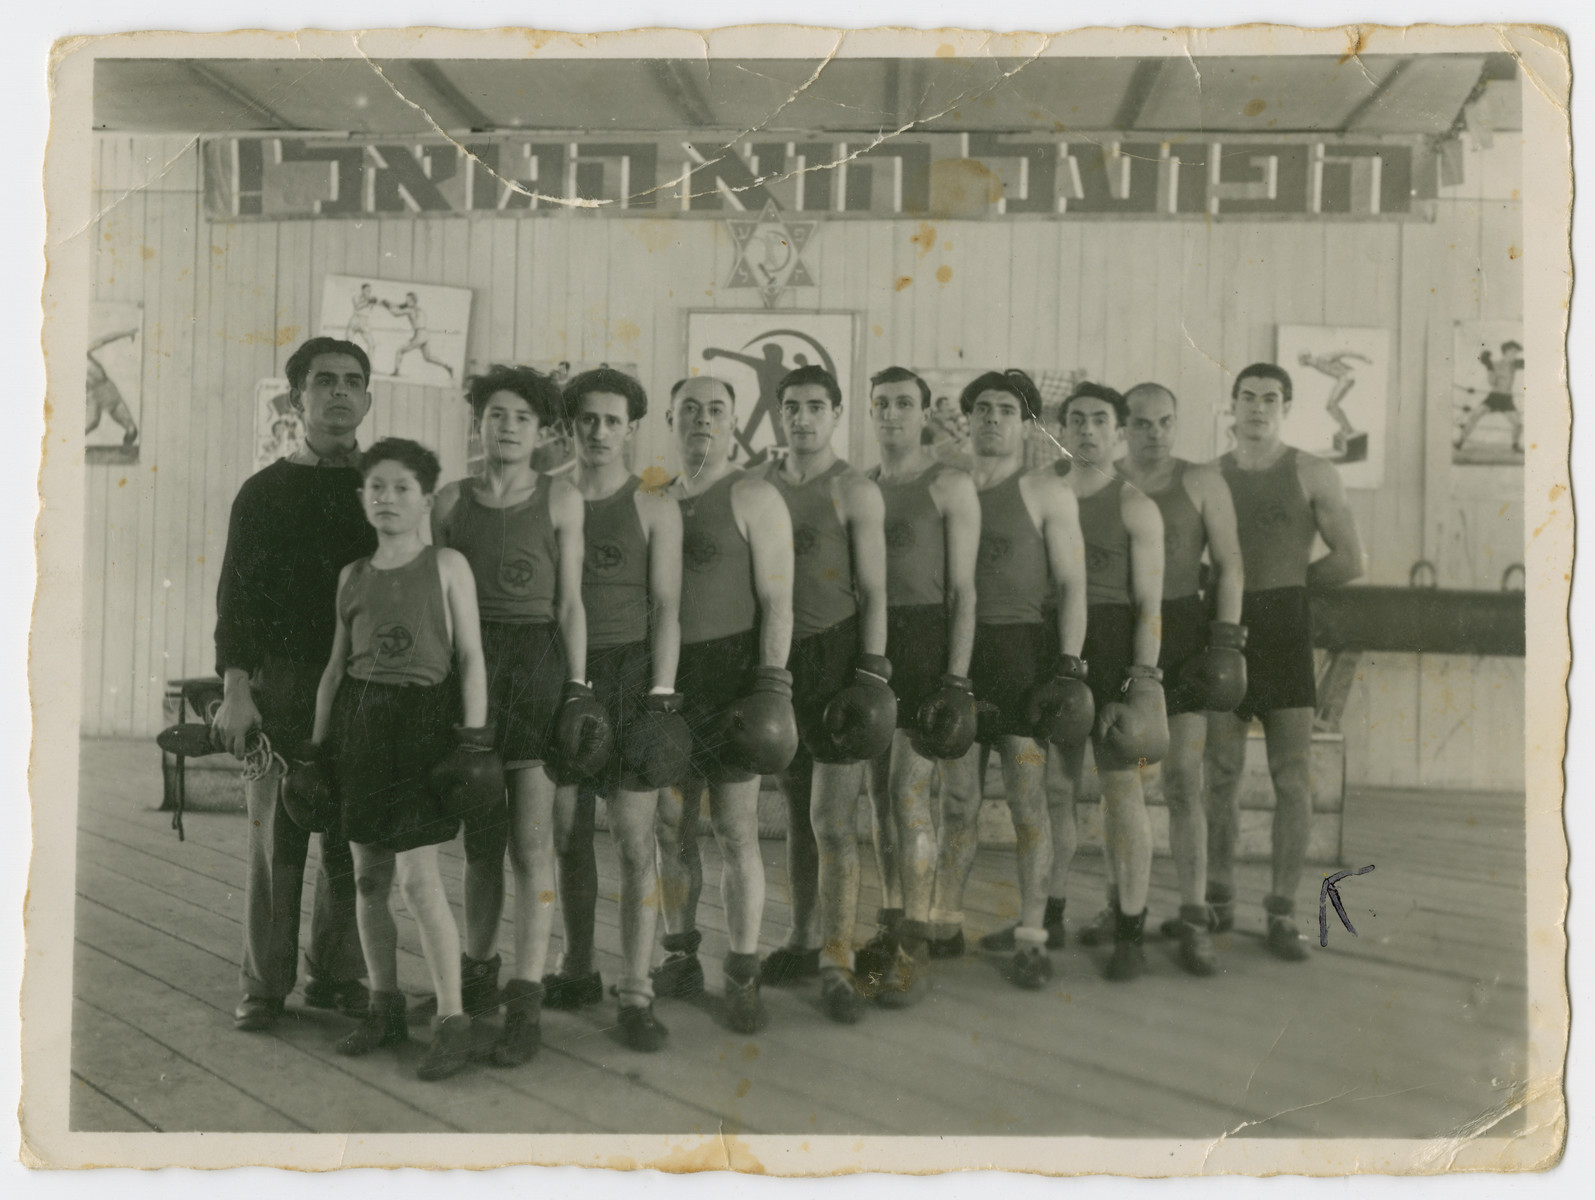 Group portrait of the members of the boxing club in Feldafing.

Richard Gutnner is at the end of the row.  The sign in Hebrew reads "HaPoel Hu HaGoel" [The worker is the redeemer.]